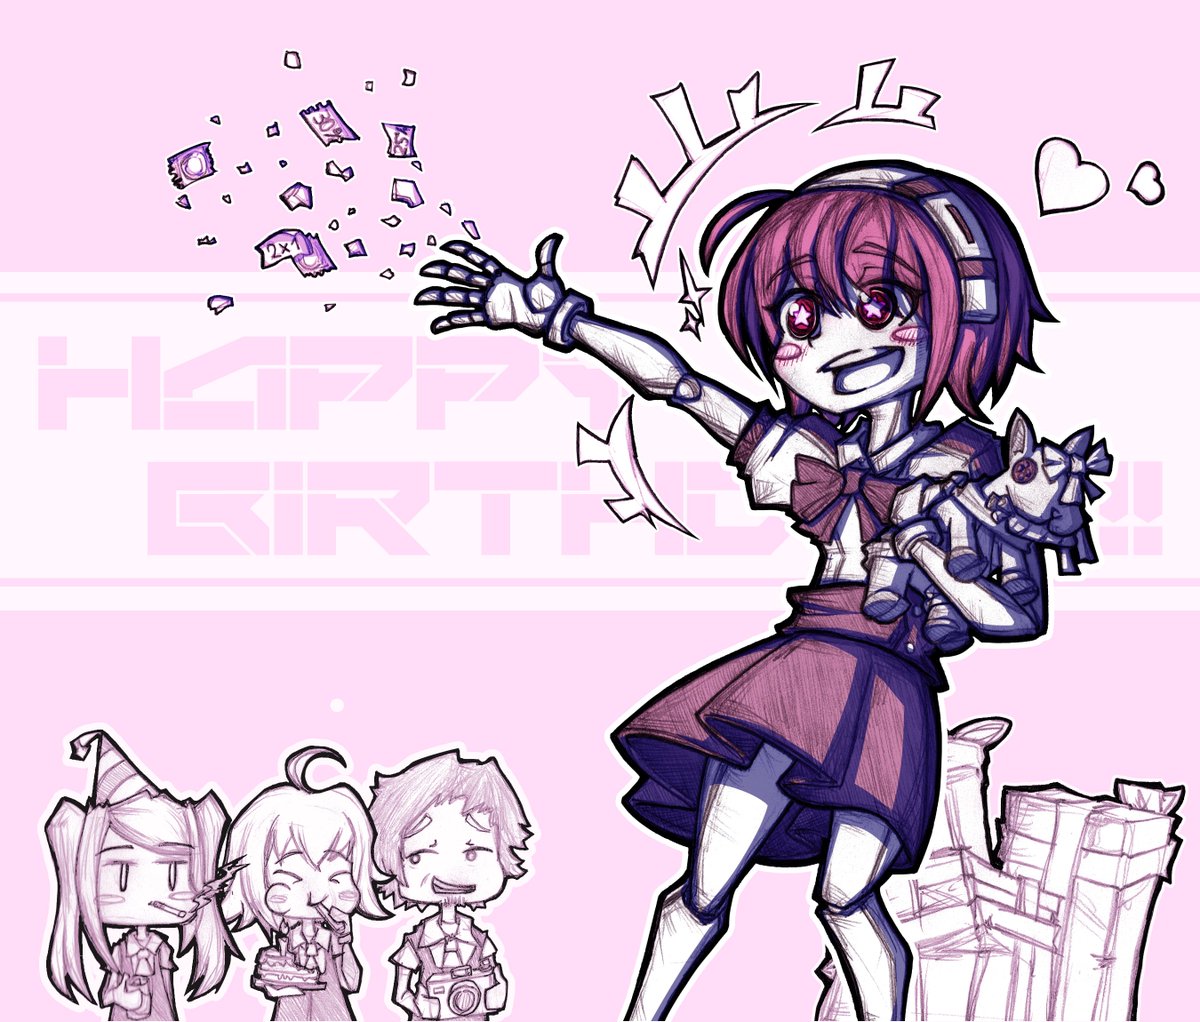 GaddTheThief on Twitter: "Don't forget the birthday girl!! 💝🎀 is Dorothy's birthday, press F to praise robot loli. She's from Va-11 Hall-A, an awesome game developed by @SukebanGames It has dank